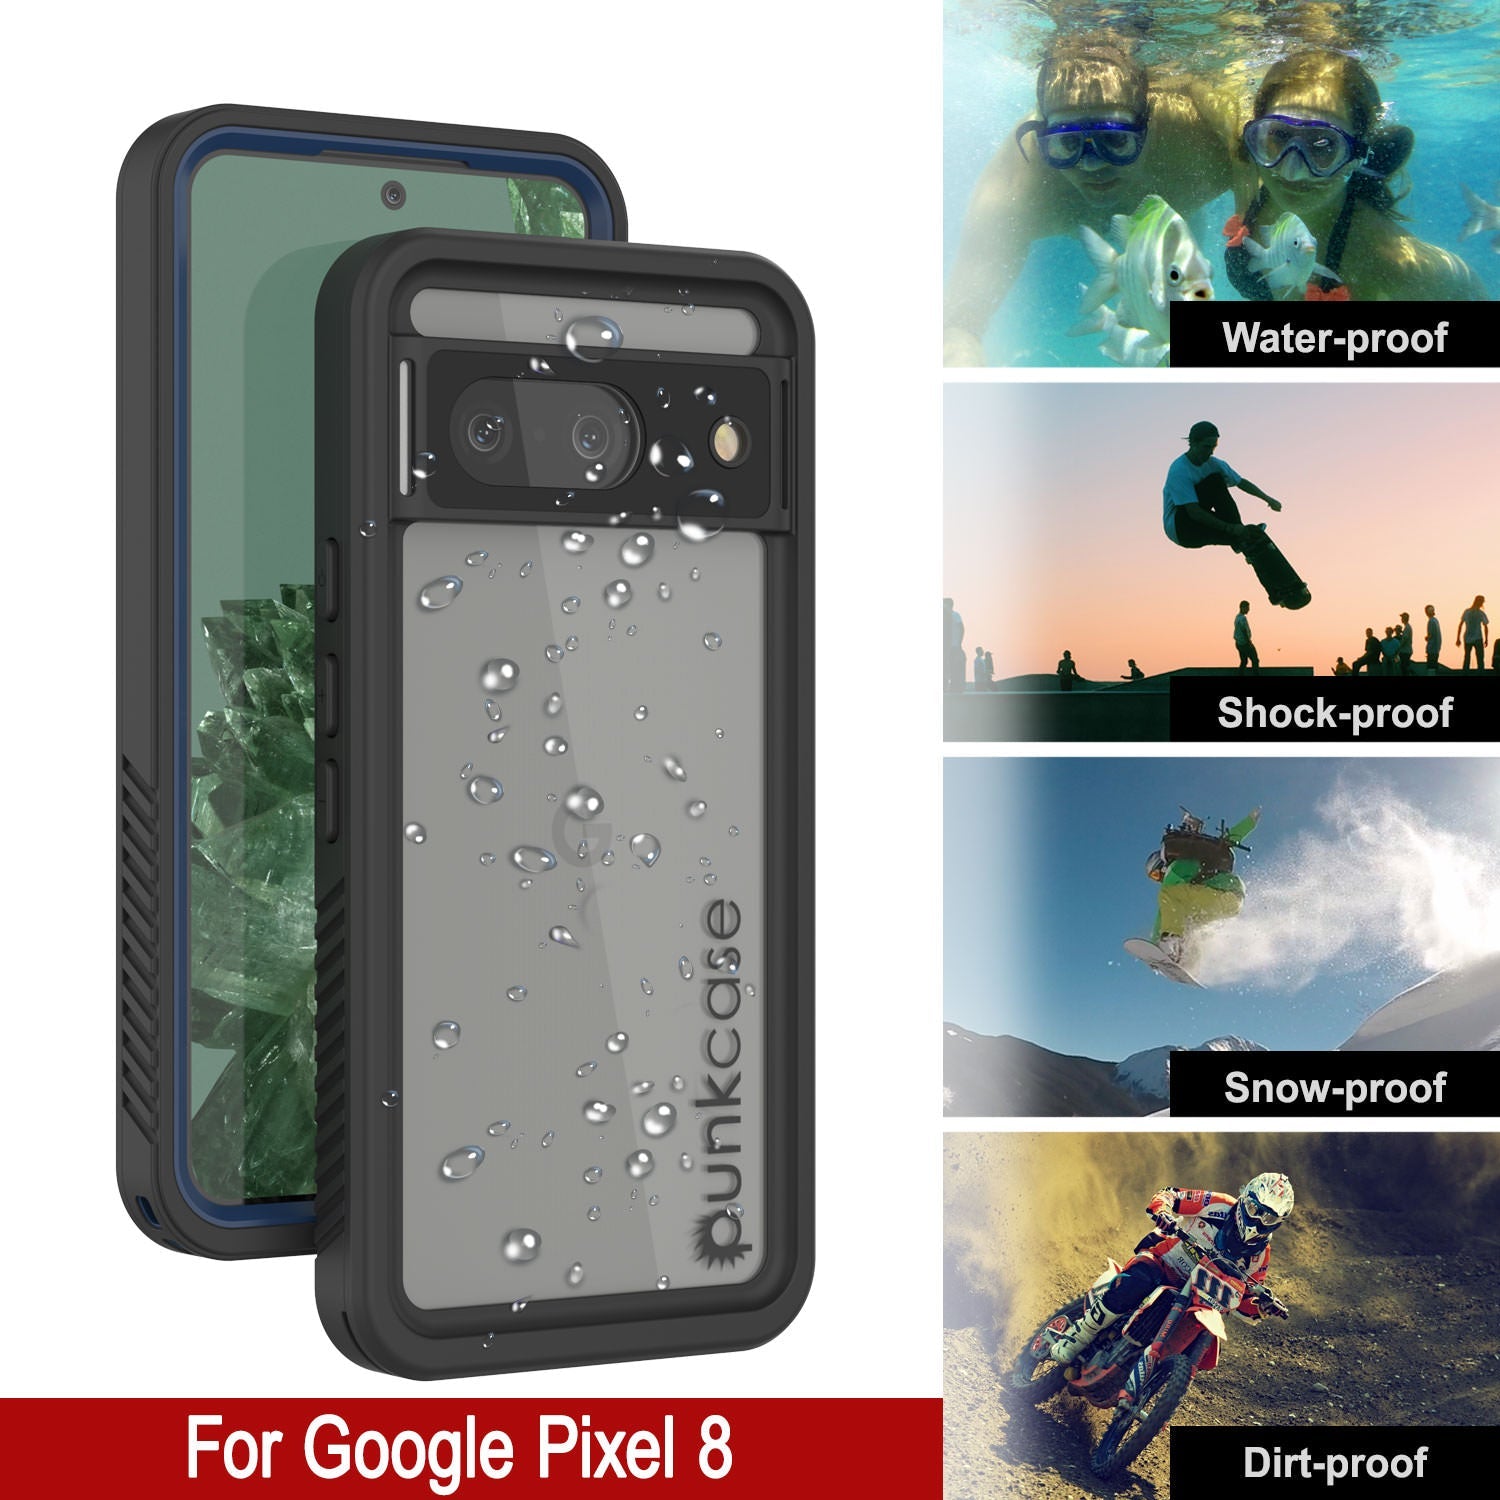 Google Pixel 8  Waterproof Case, Punkcase [Extreme Series] Armor Cover W/ Built In Screen Protector [Navy Blue]